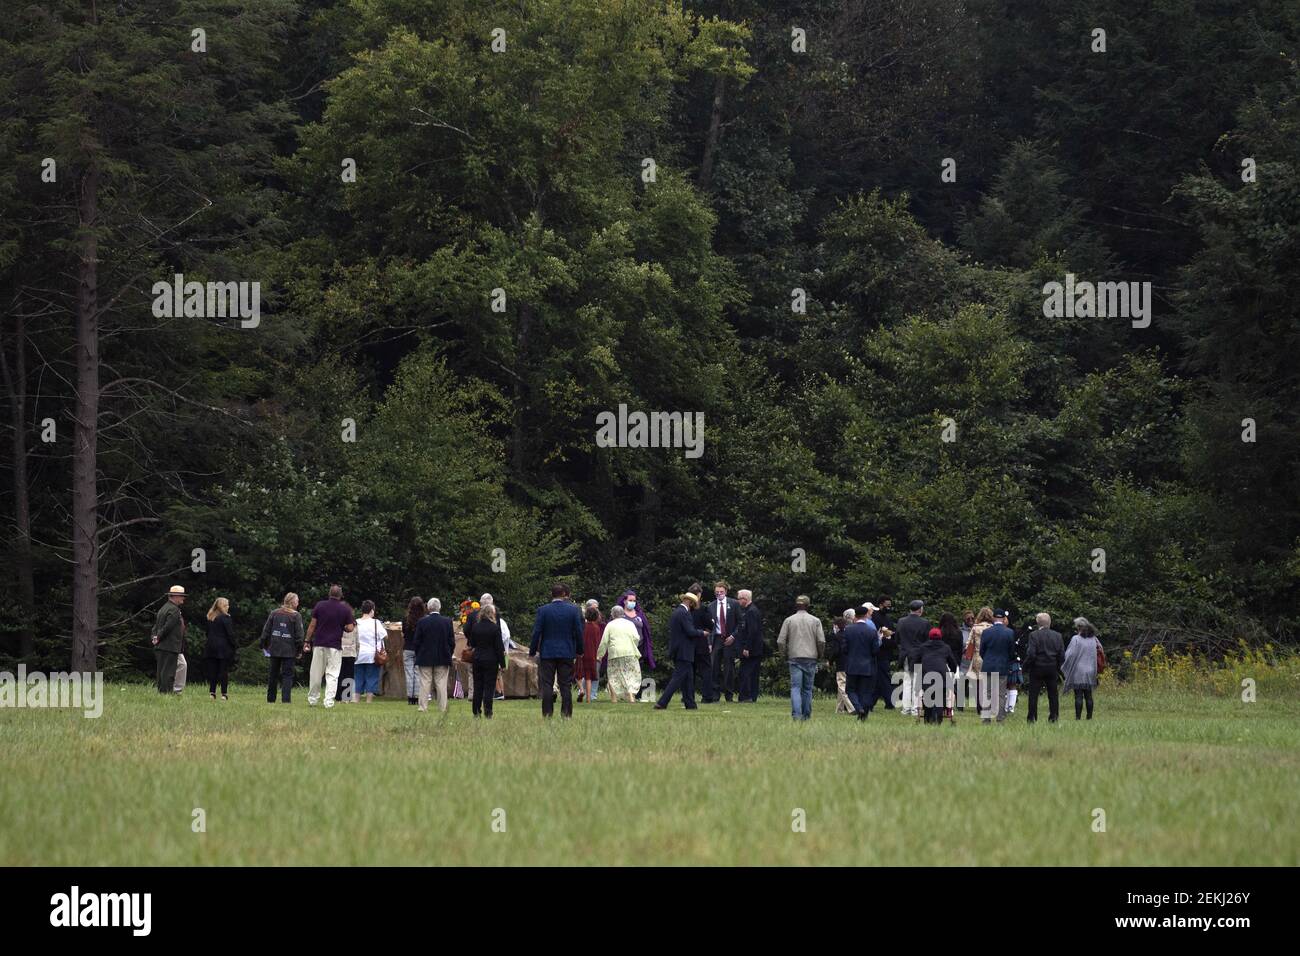 Sept 11, 2020; Stoystown, PA, USA; Family members walk to the rock marking the crash site of Flight 93 at the conclusion of the 19th annual September 11th Observance at the Flight 93 National Memorial in Shanksville, Penn. on Sept. 11, 2020. Mandatory Credit: Jack Gruber-USA TODAY/Sipa USA Stock Photo